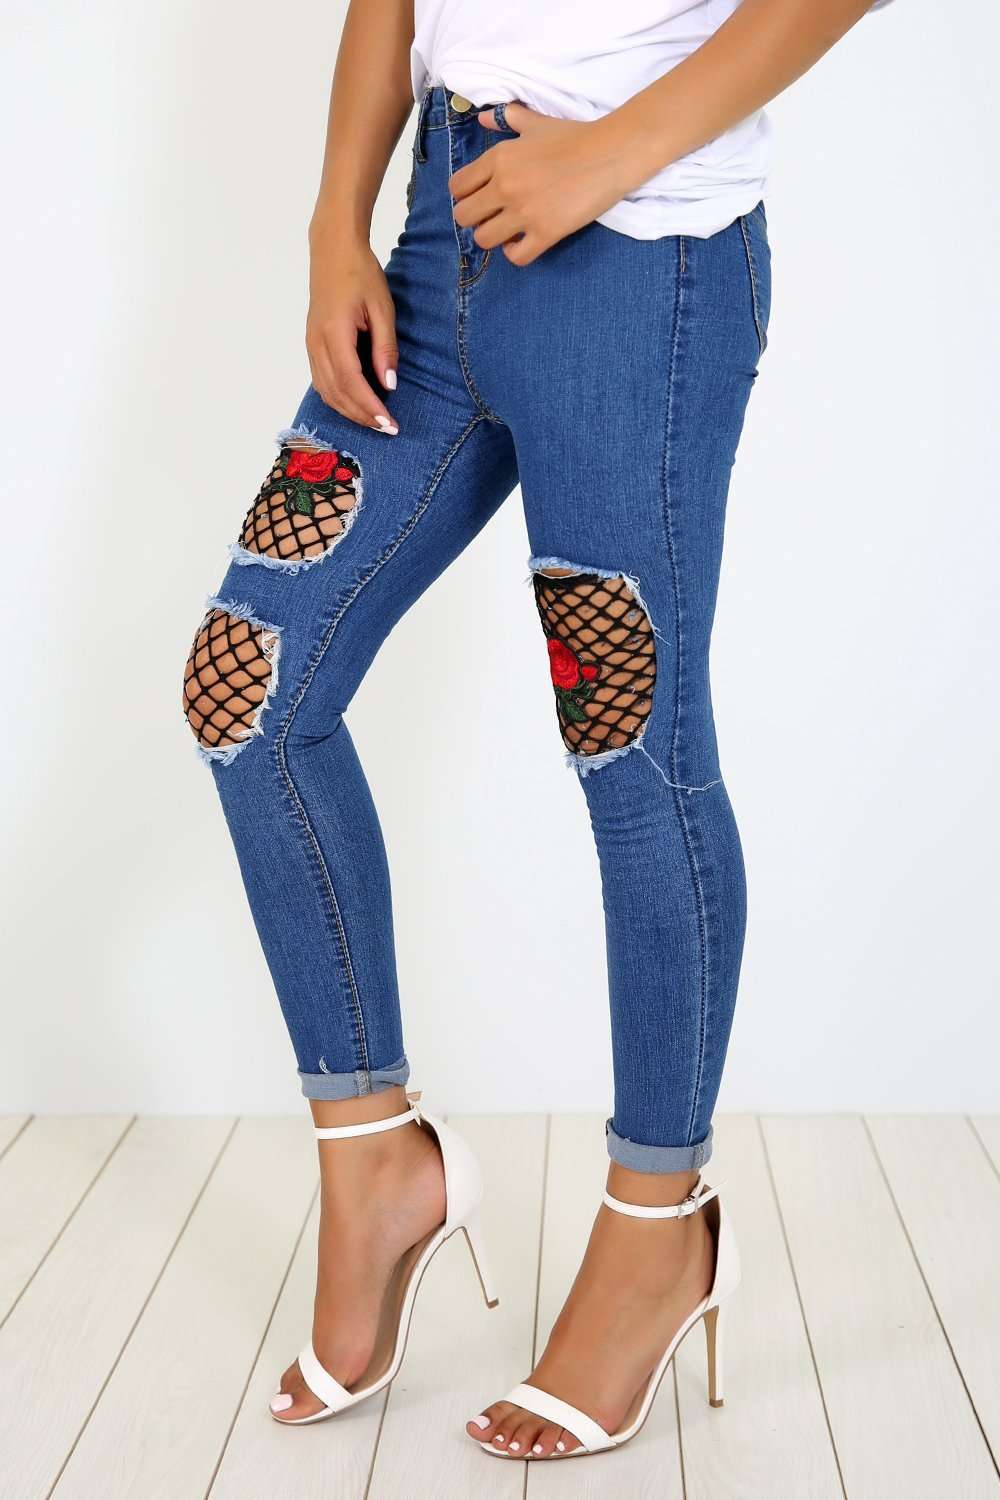 Mia Mesh Floral Ripped Skinny Jeans - bejealous-com